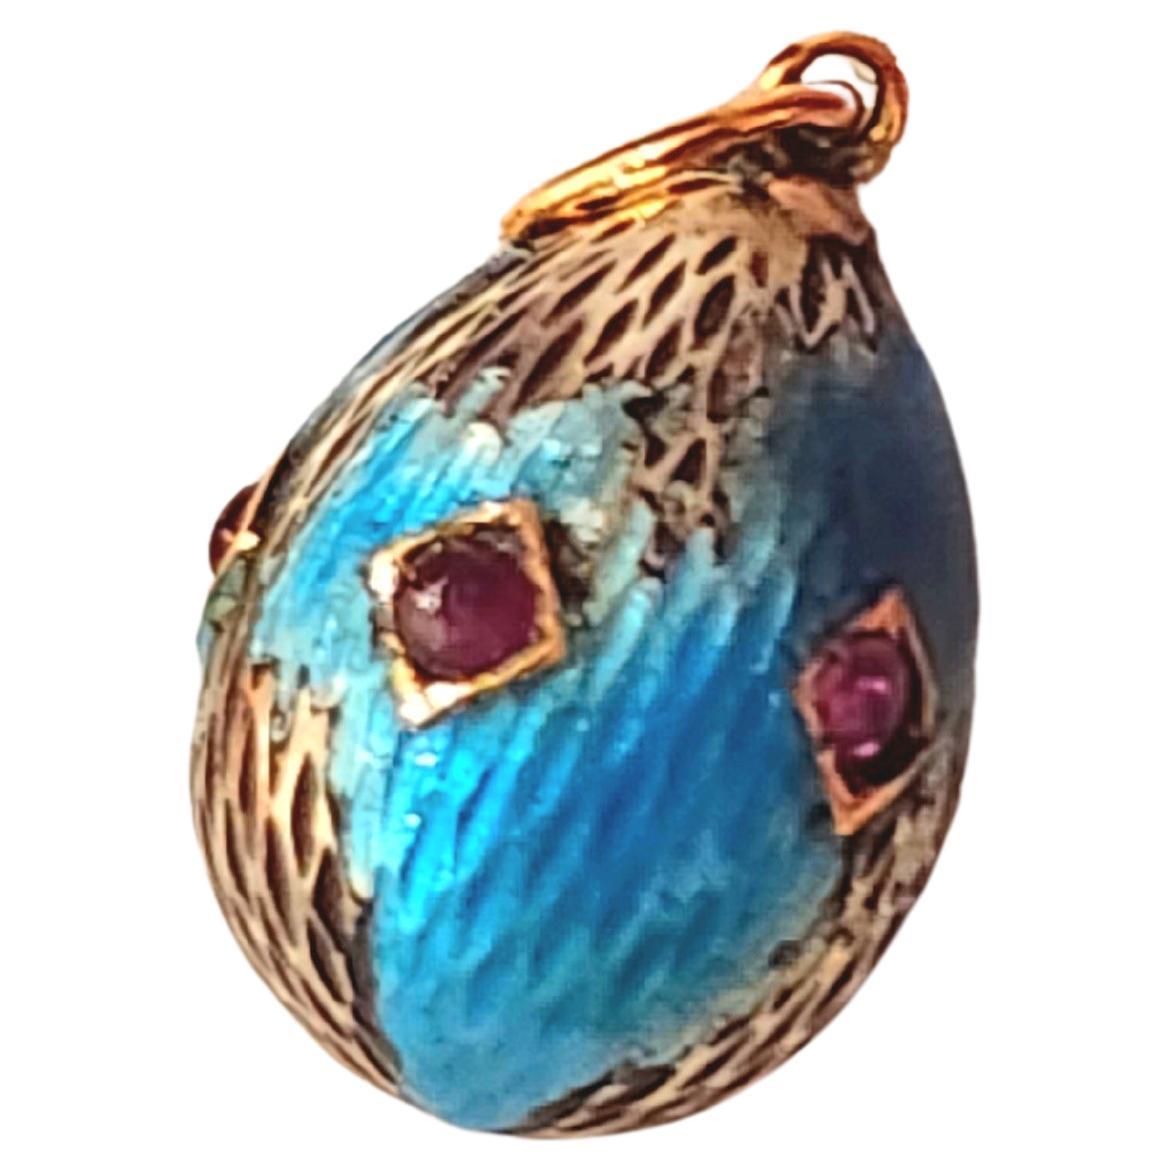 Antique imperial russian era 1910s enamel egg pendant decorted with 5 natural ruby stones NOTE ( most of the enamel ben wear out ) pendant lenght 1.5cm hall marked 56 imperial russian gold standard 